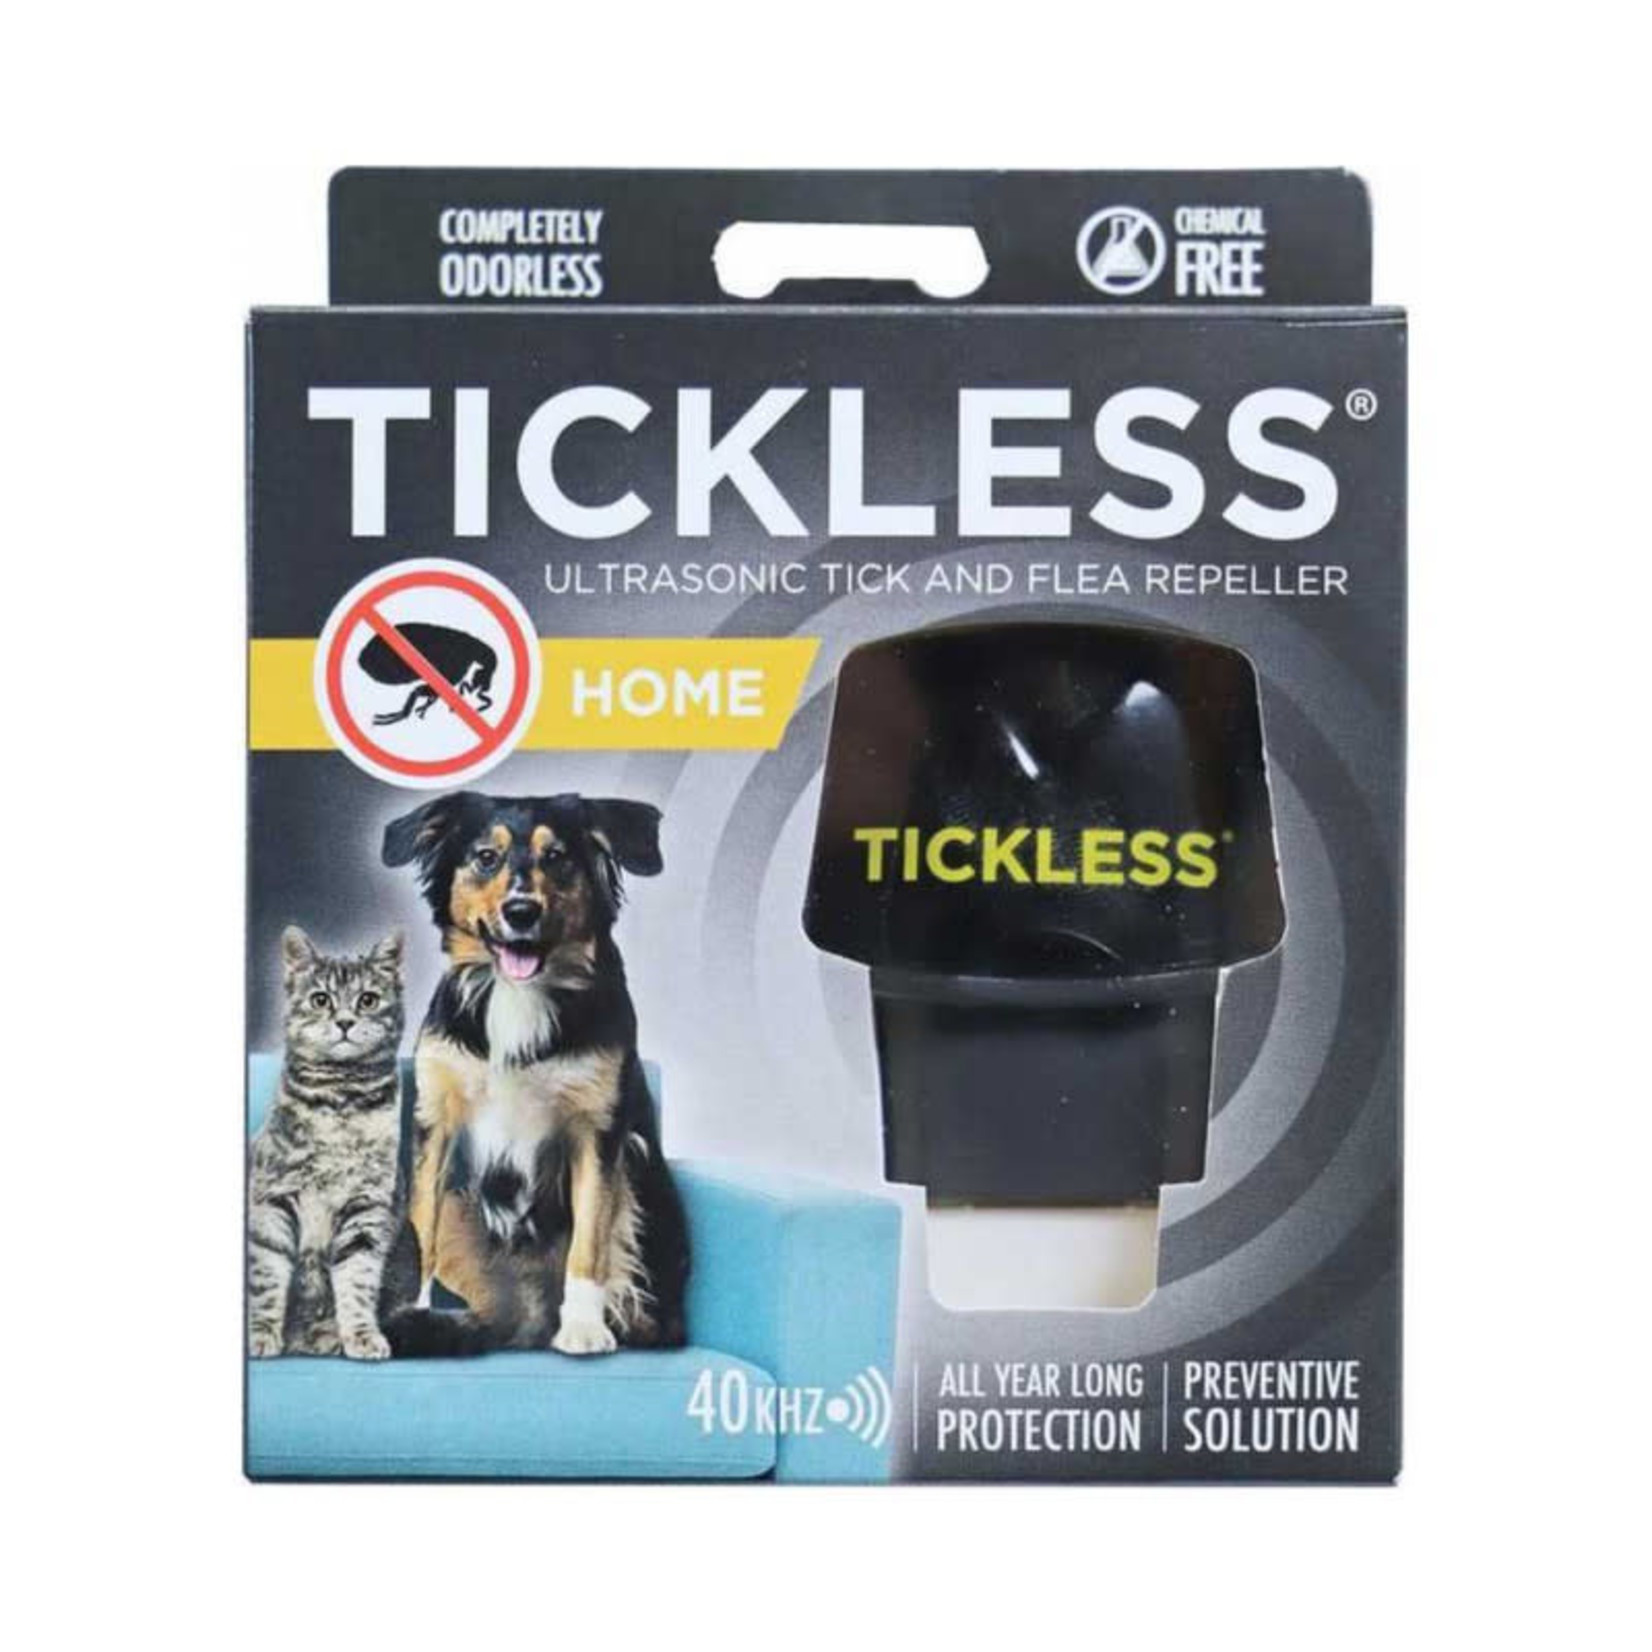 Tickless Pro Tickless Home